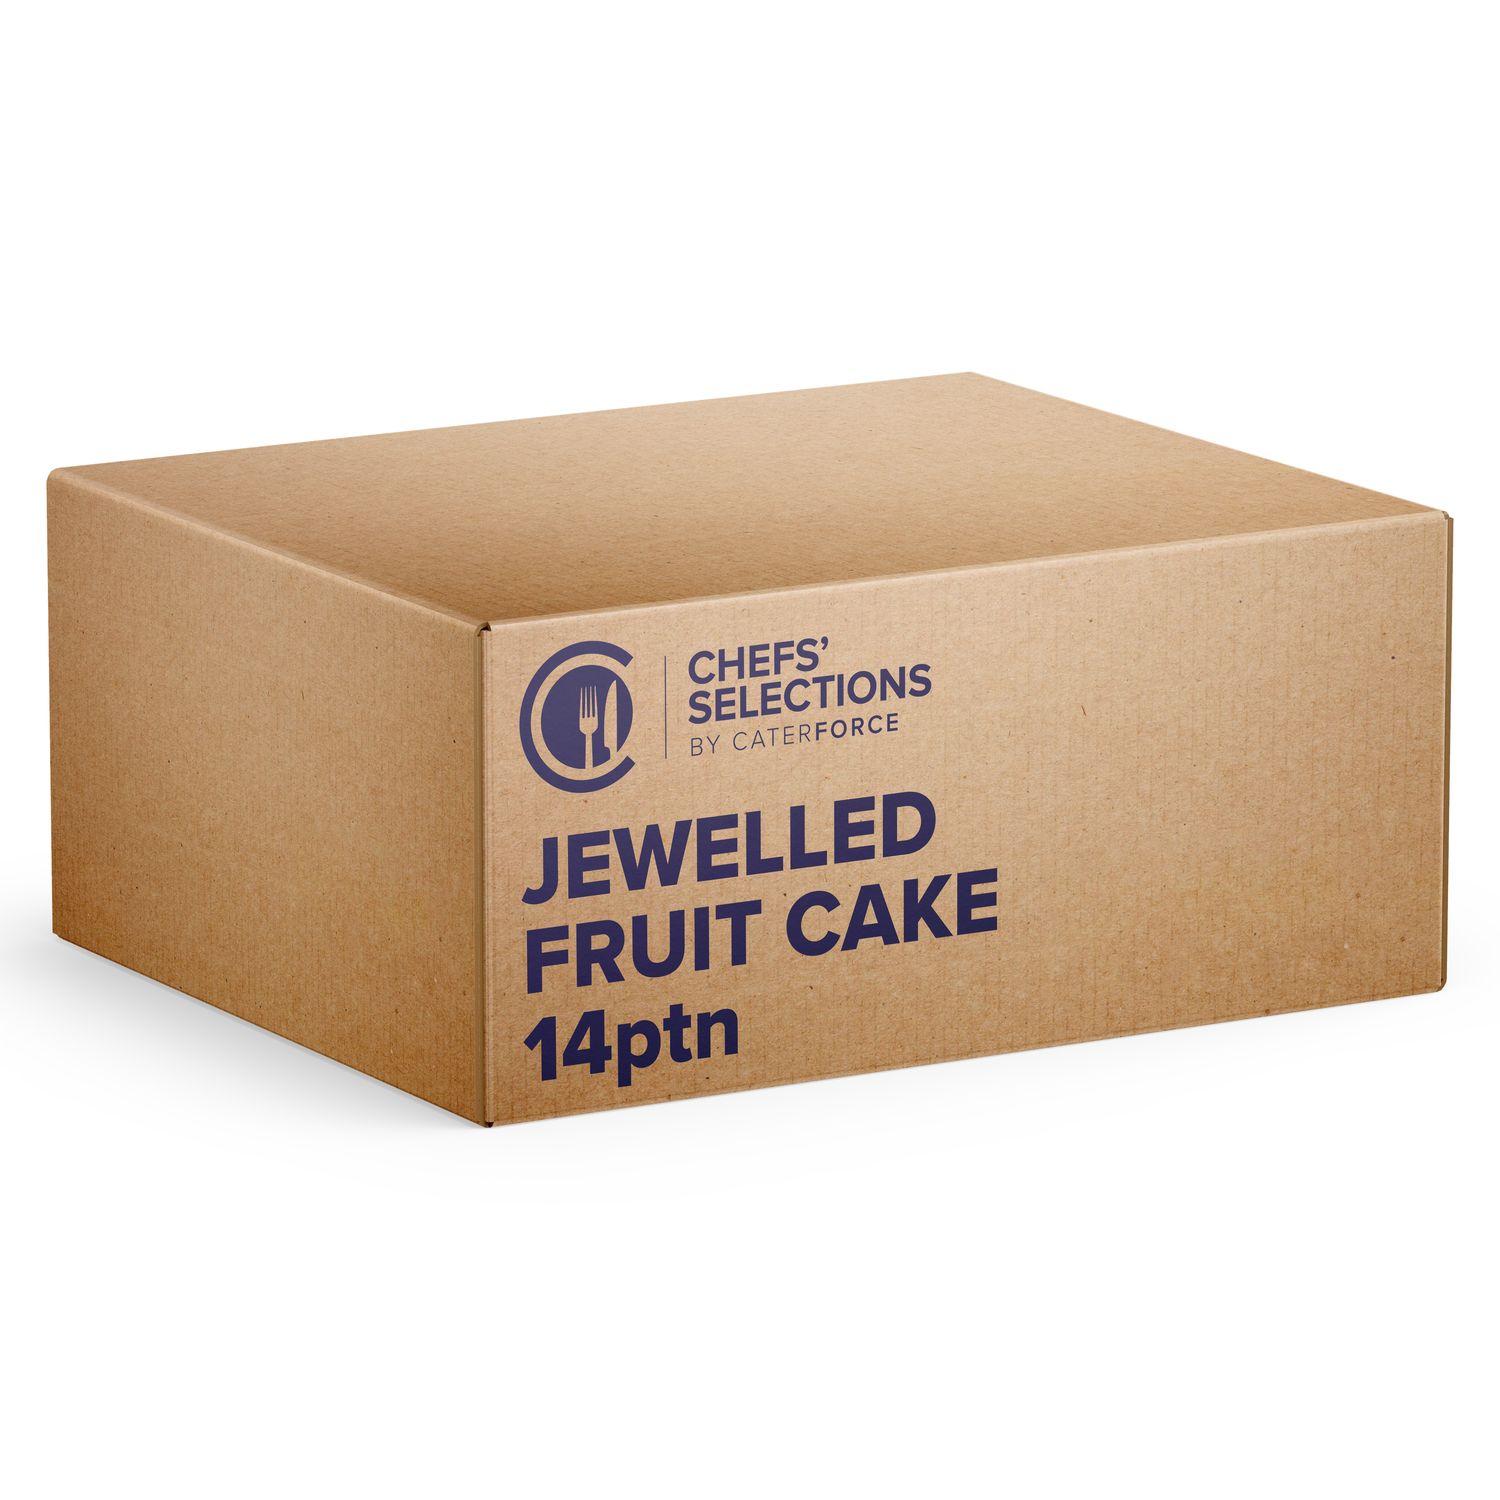 Chefs’ Selections Jewelled Fruit Cake (1 x 14p/ptn)